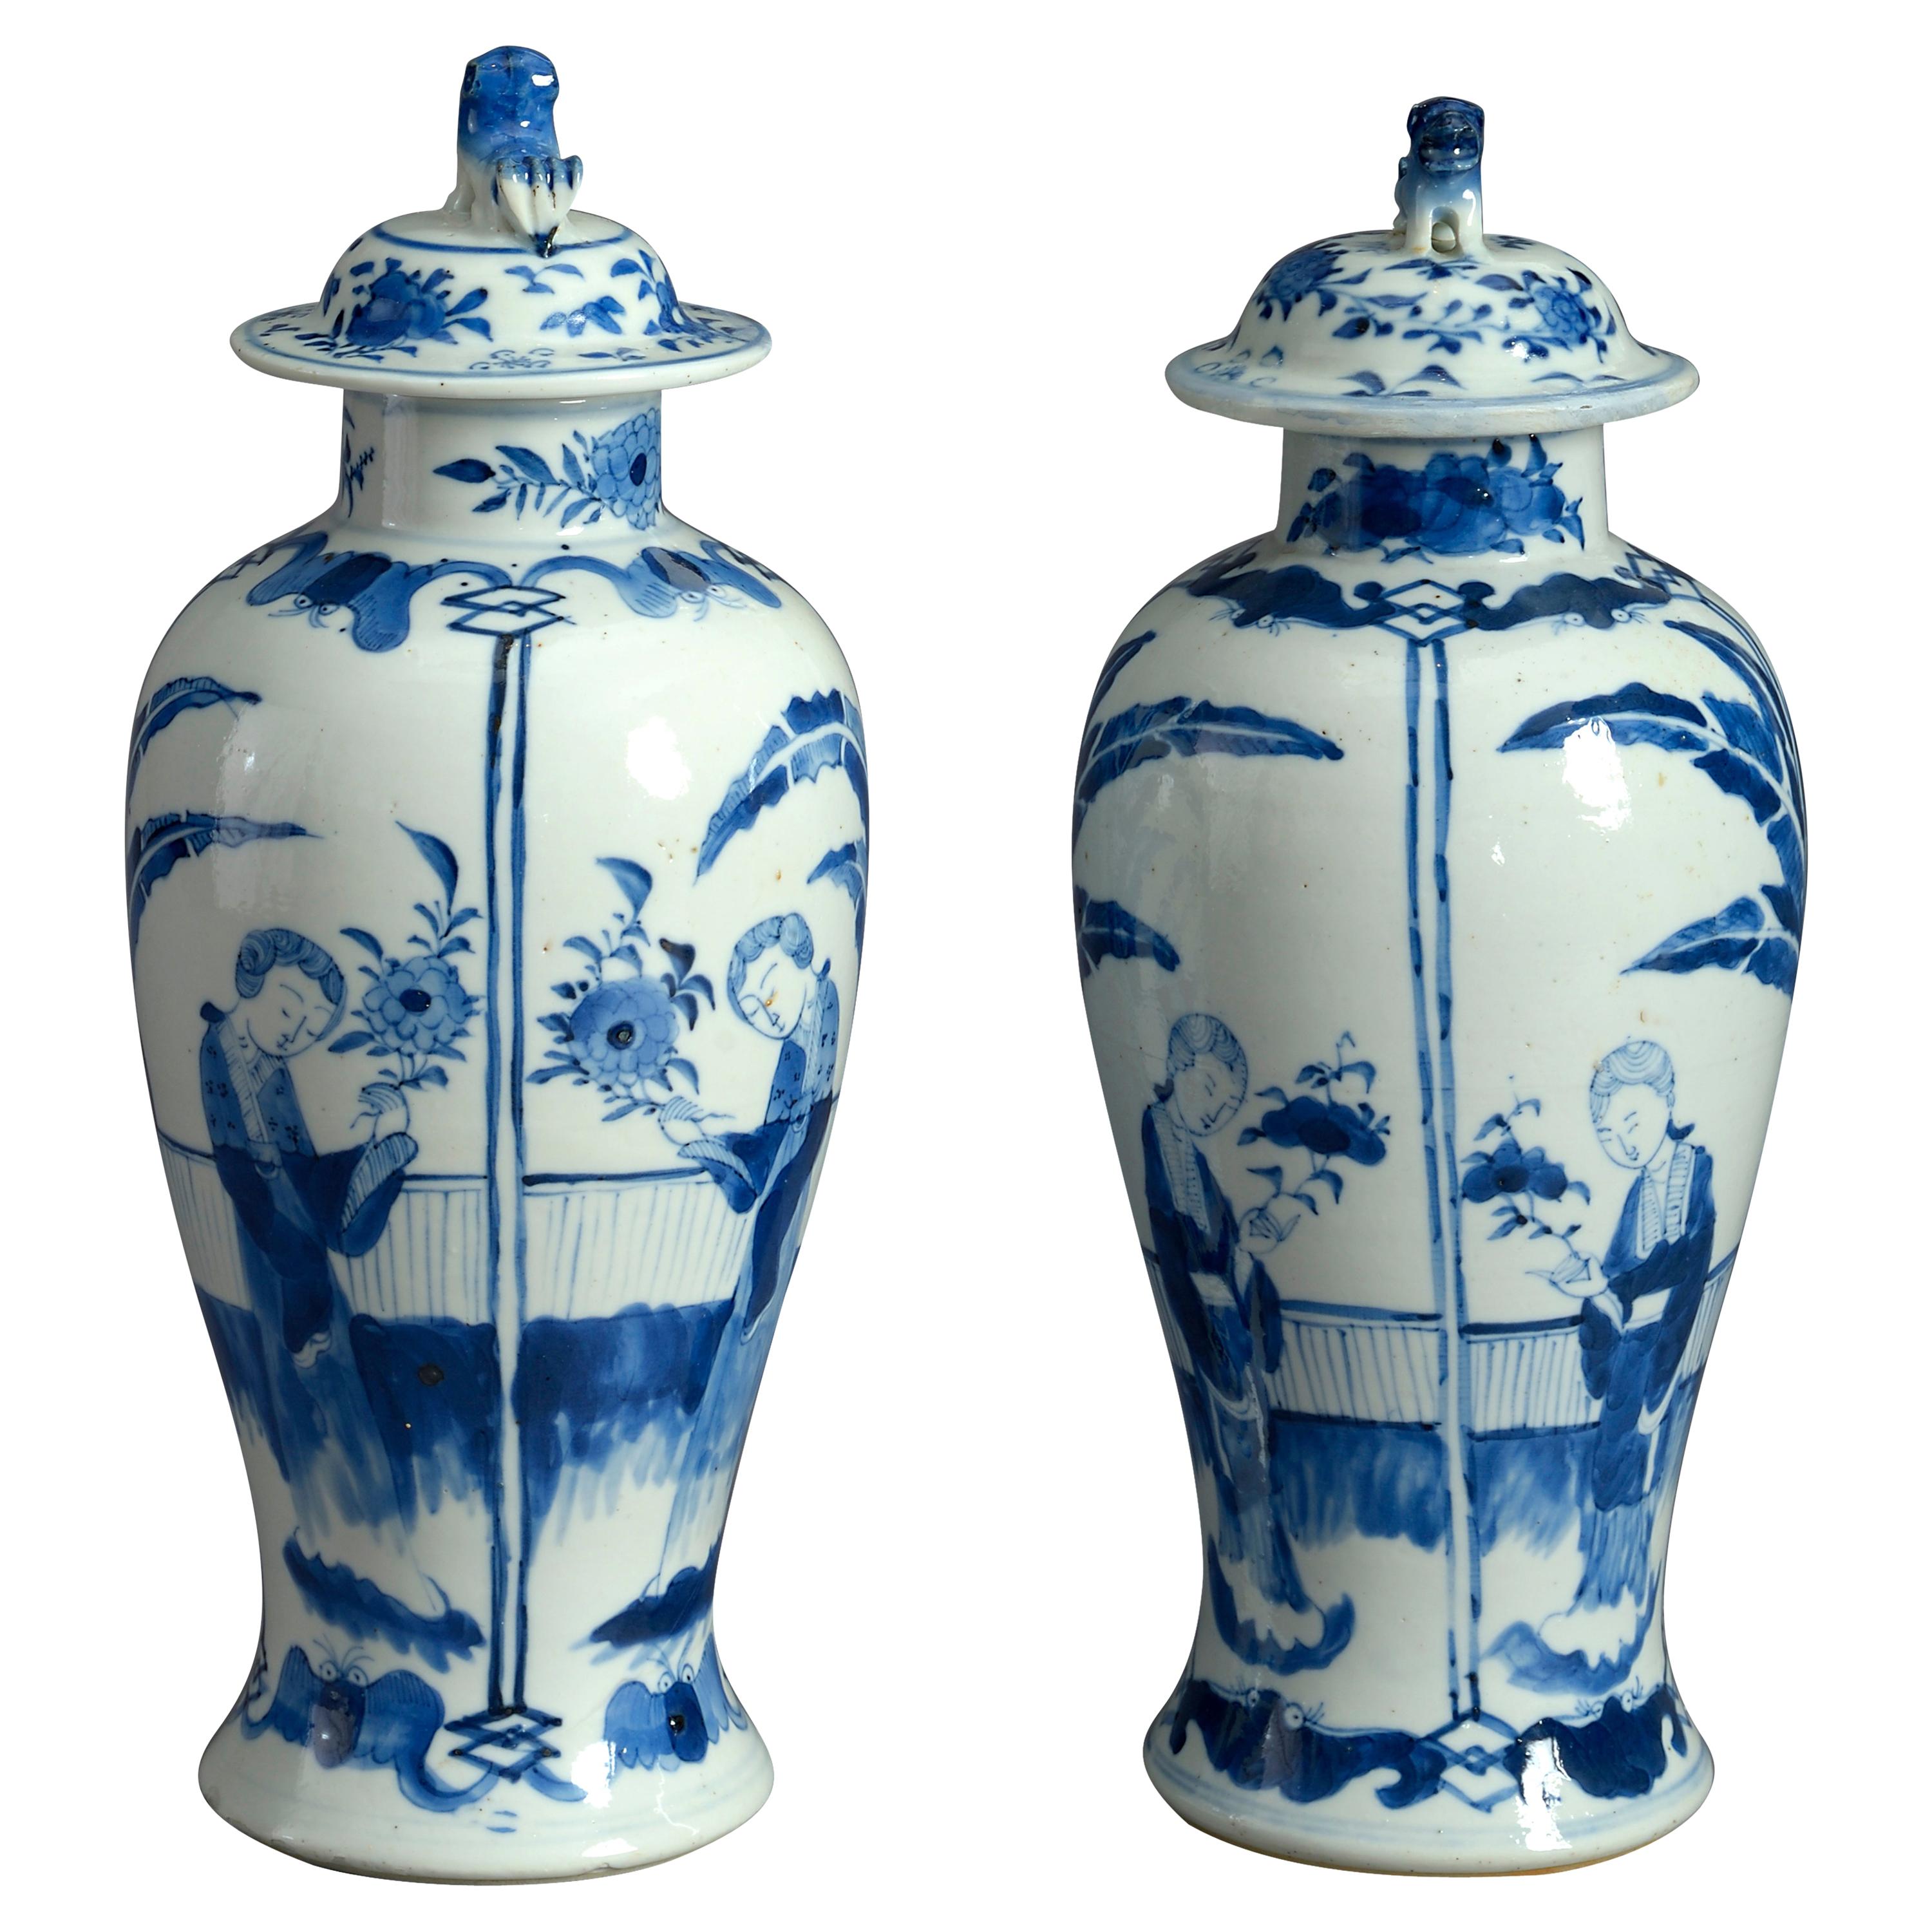 Pair of 19th Century Blue and White Porcelain Vases and Covers in the Kangxi Tas